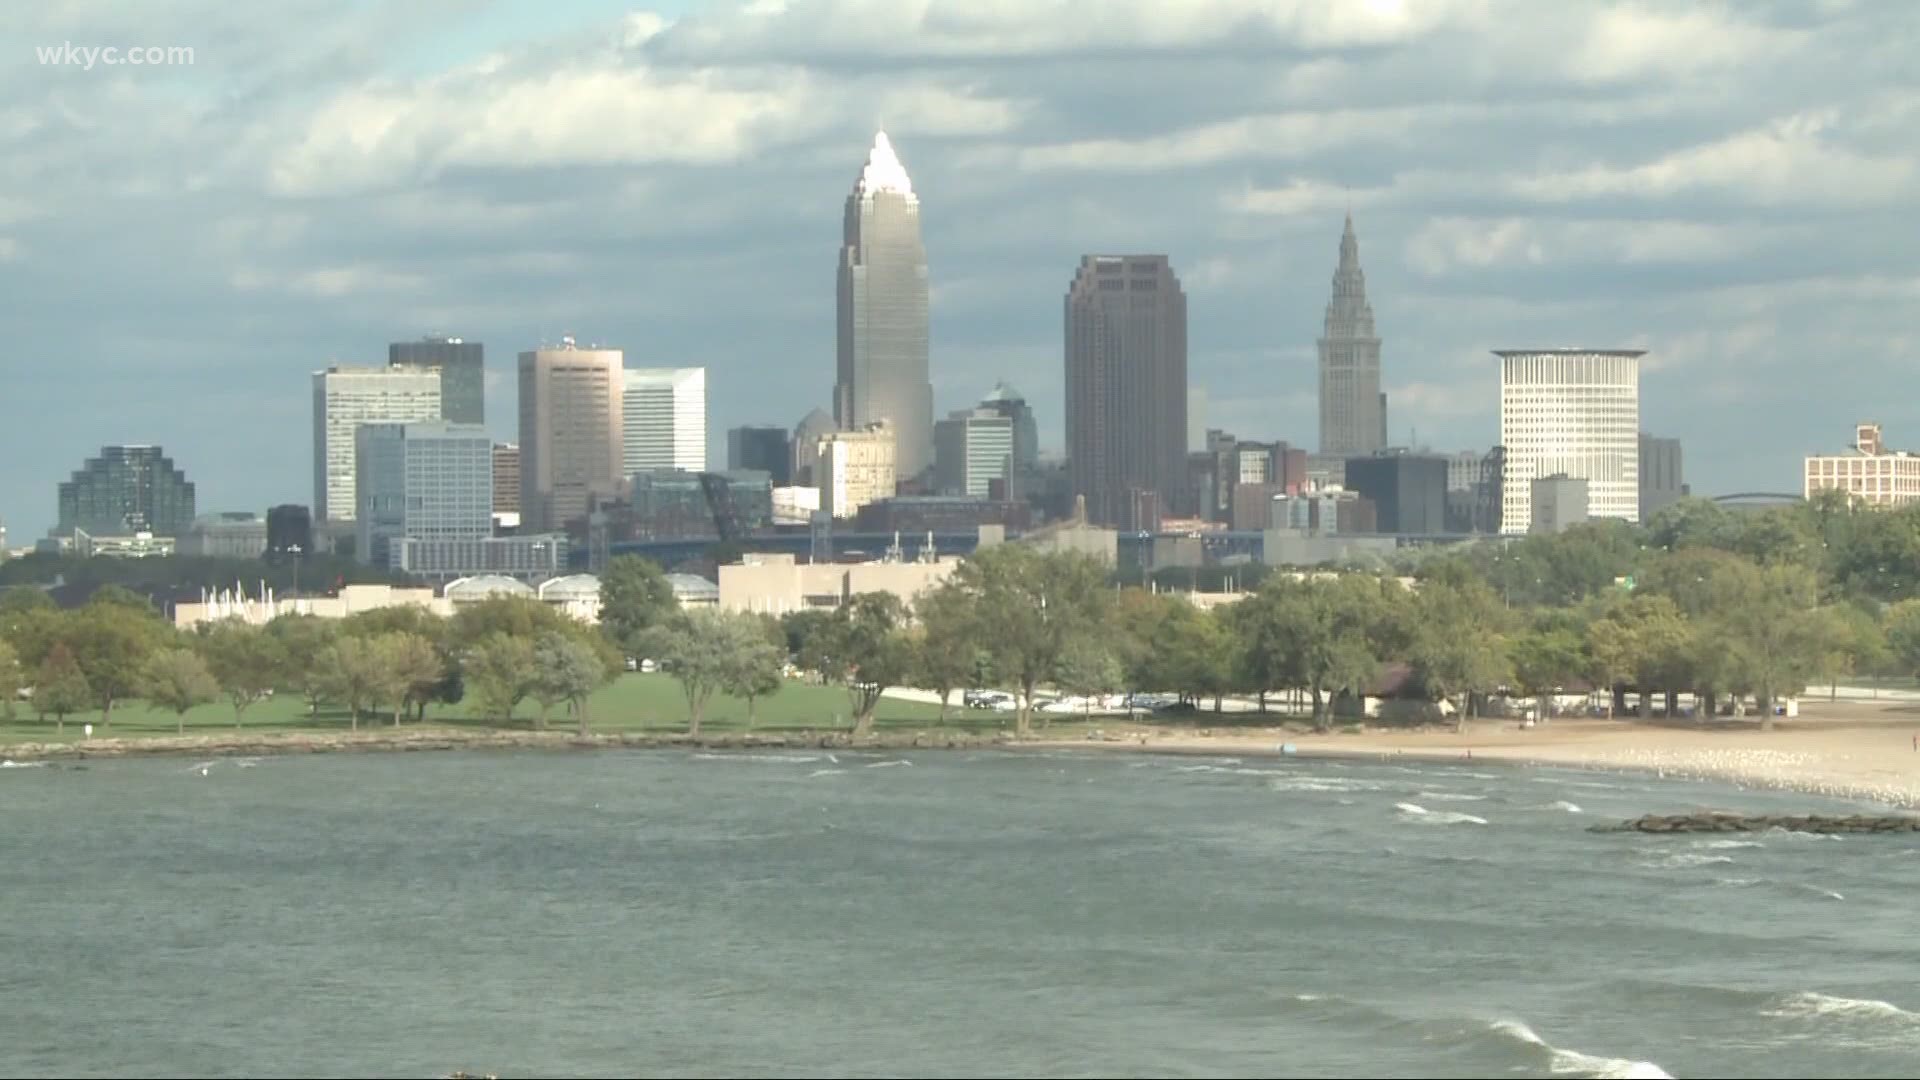 With COVID restrictions soon to be lifted, Cleveland's hospitality & tourism industry is looking to bounce back from last year's bad numbers.